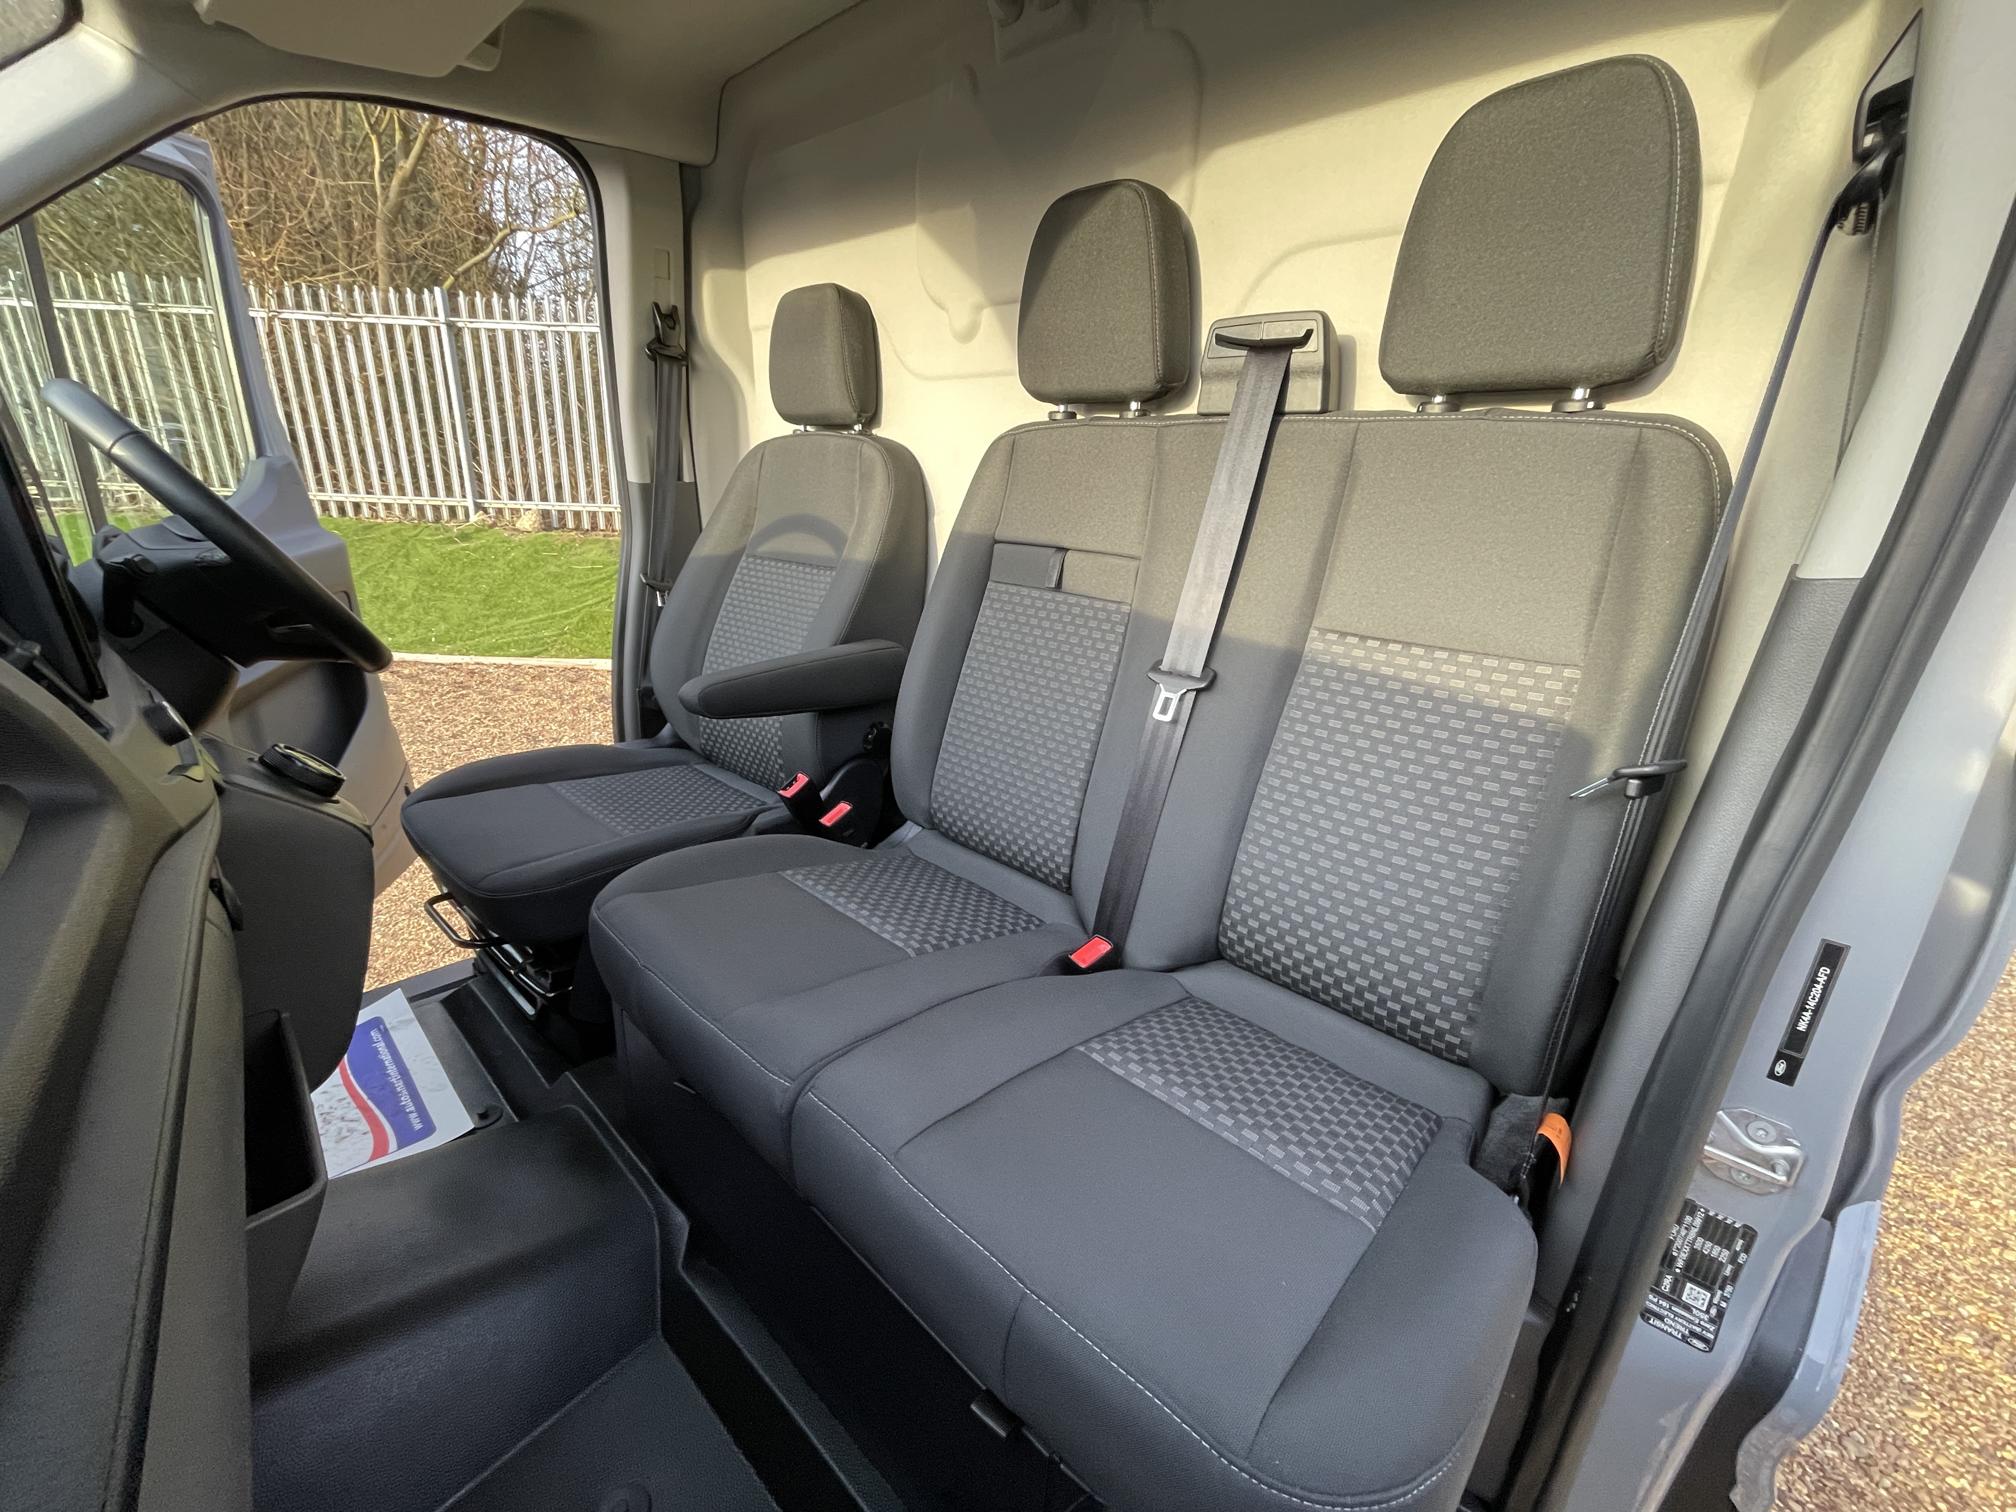 3 Seat Ford Transit electric van for sale